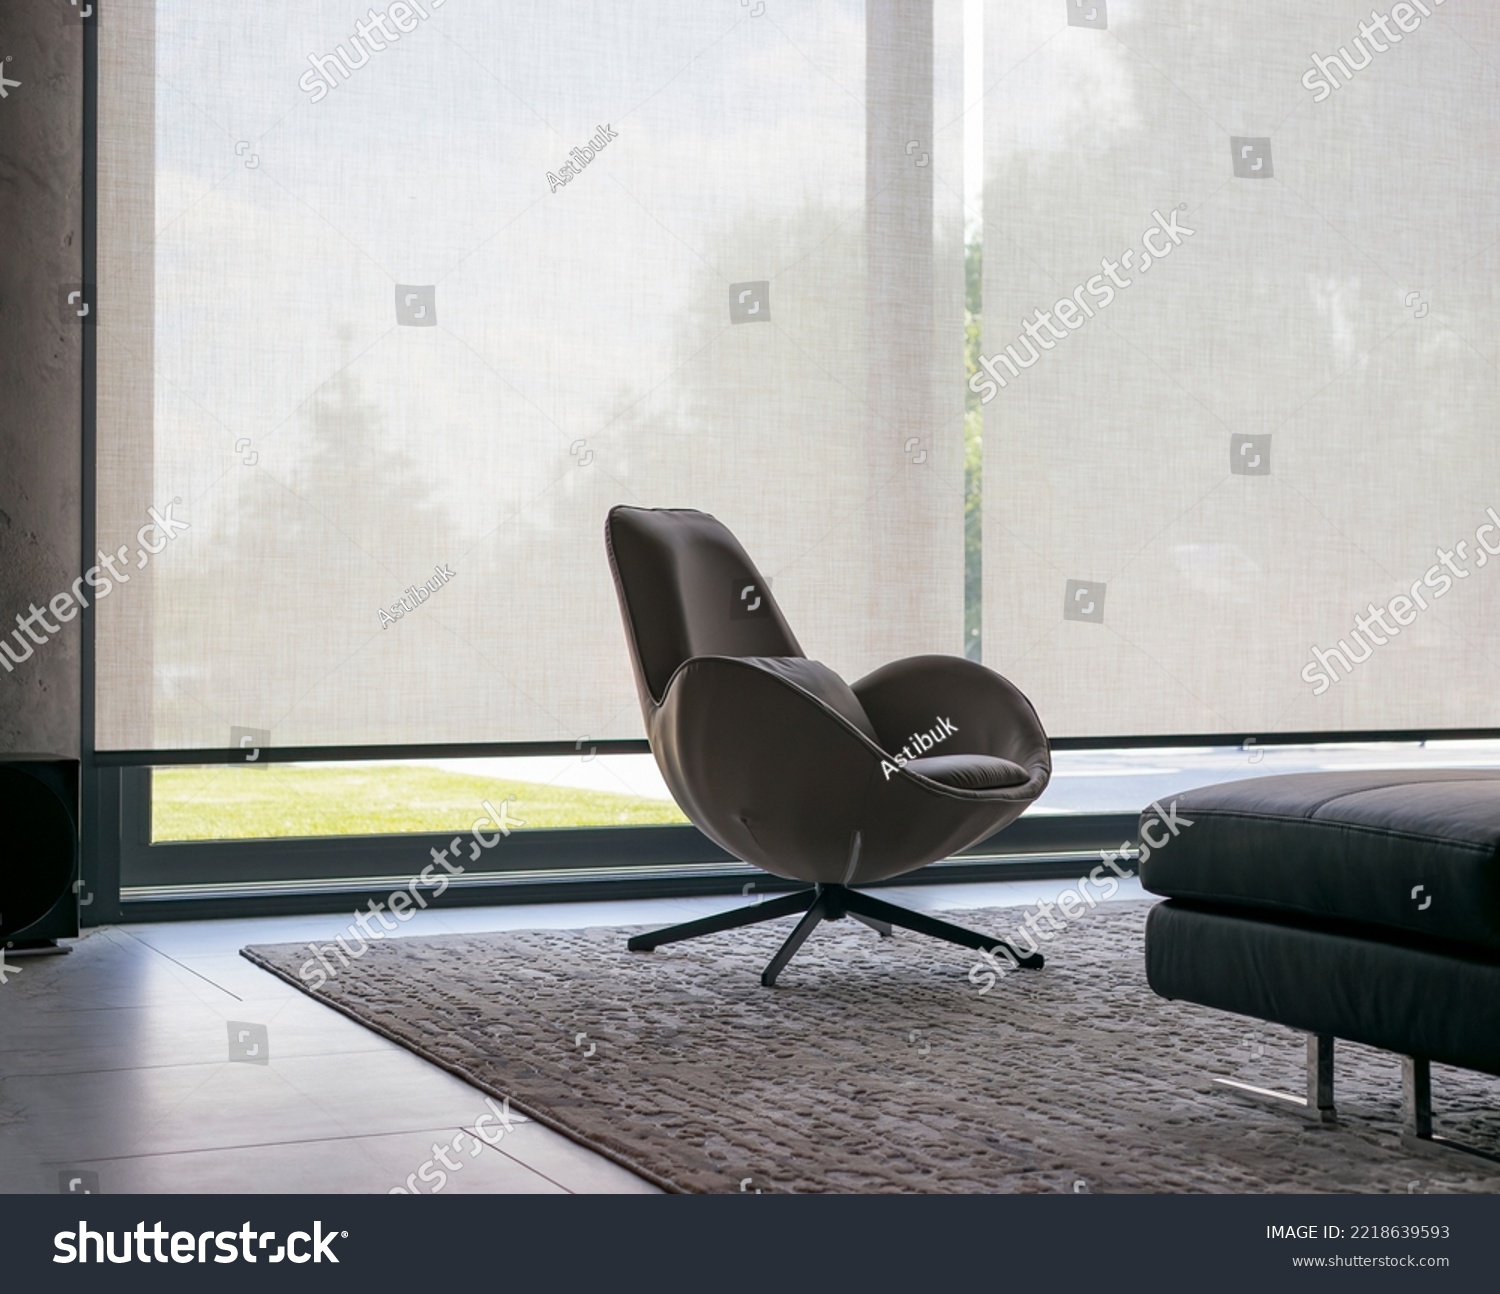 Roller blinds of large sizes on the window in the interior. Automatic solar shades, fabric with linen texture. In front of a large window is a chair on a carpet. Outside is a view of the garden. #2218639593